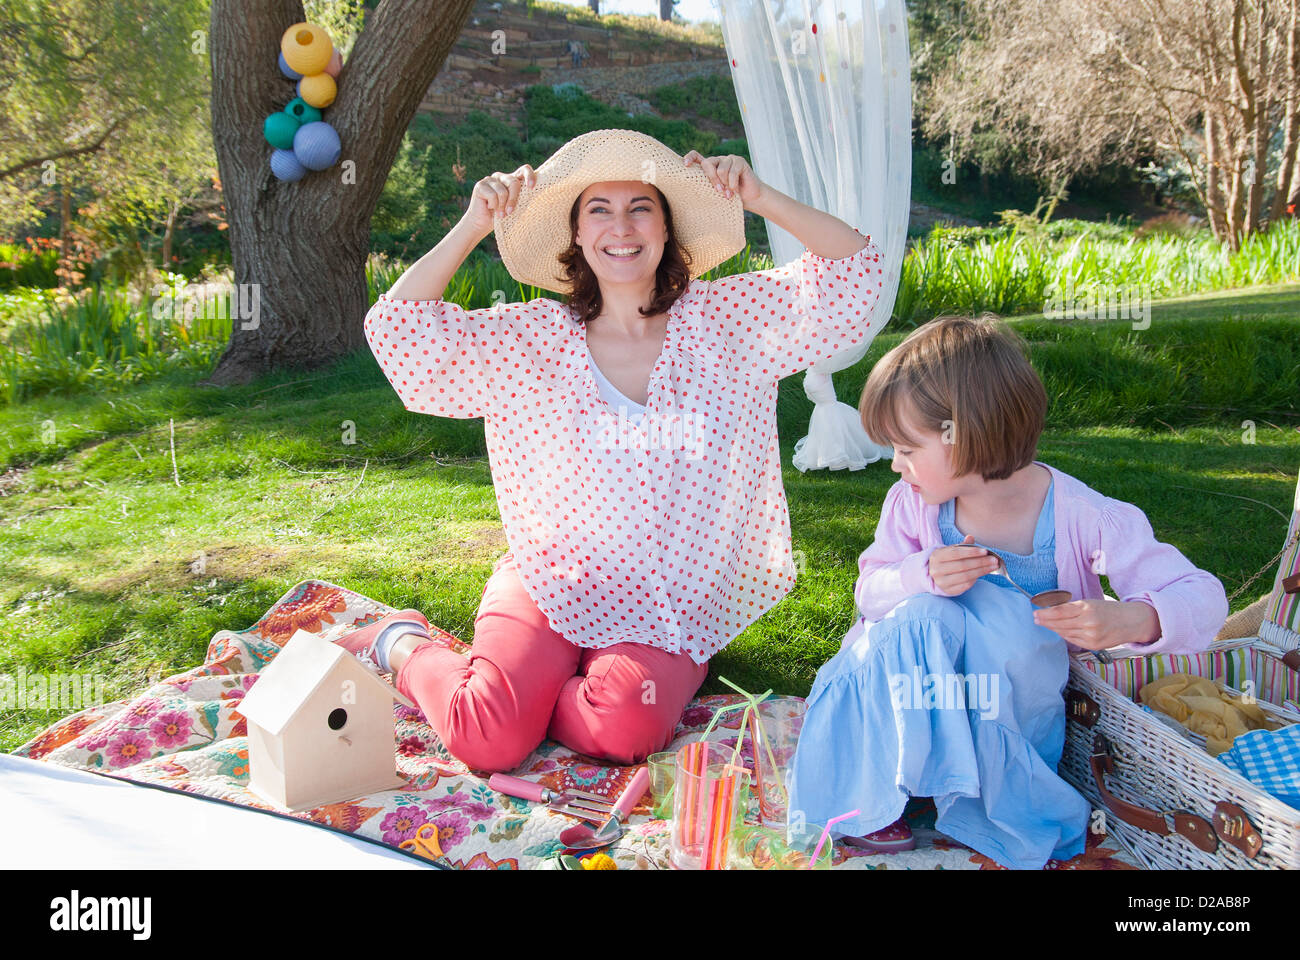 Mother and daughter having picnic Stock Photo